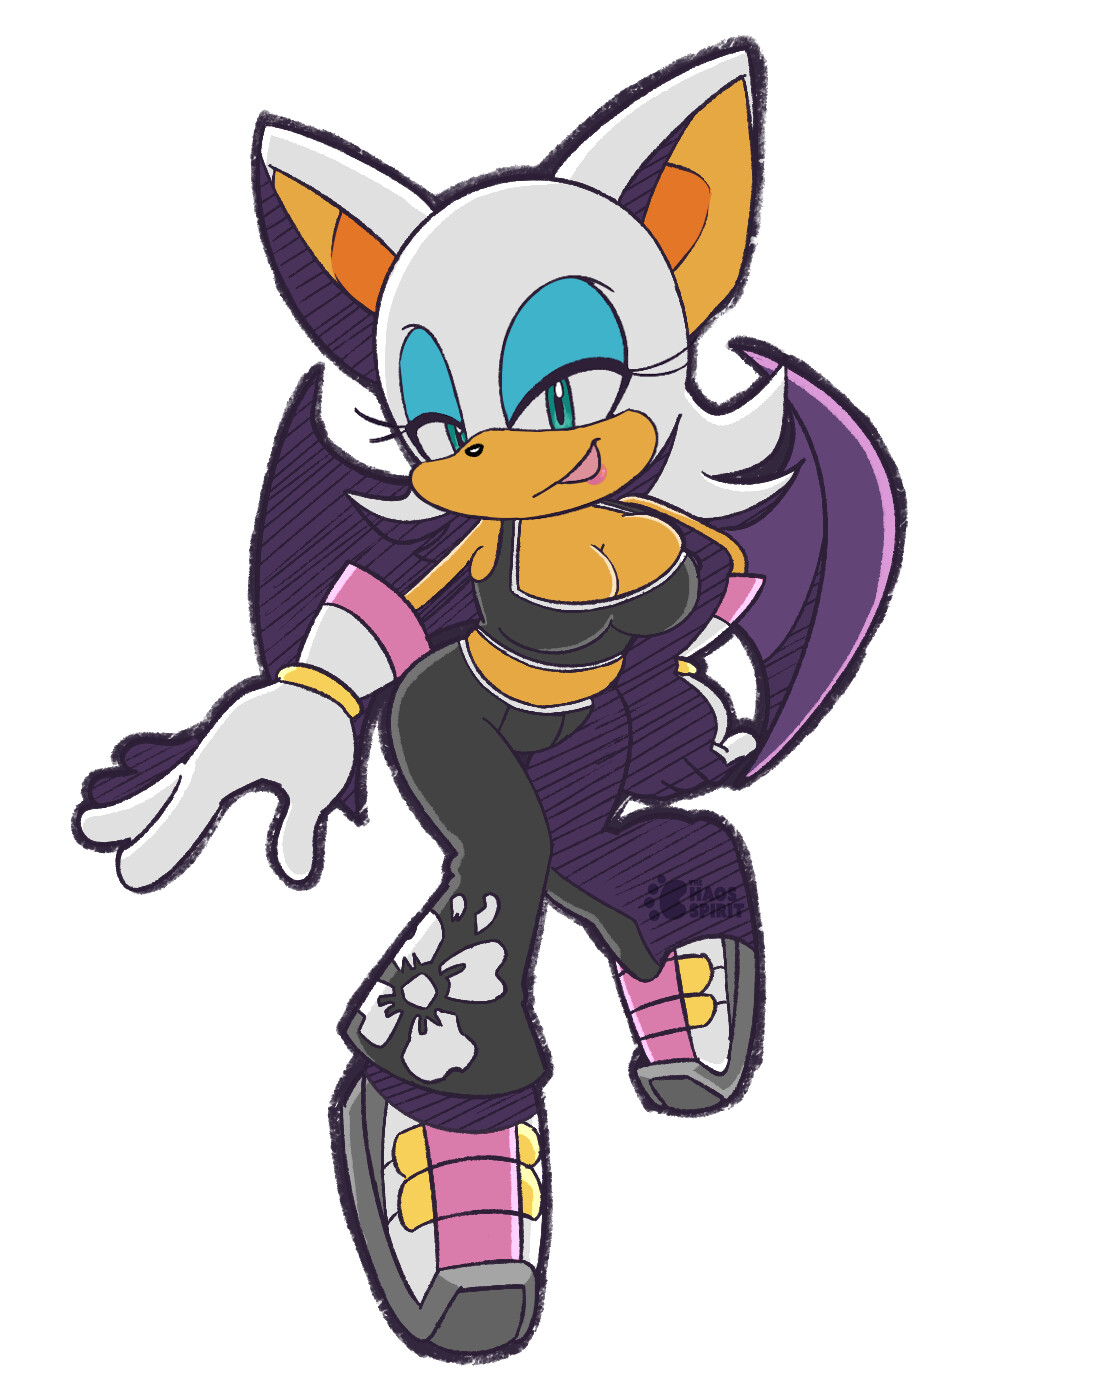 Rouge The Bat sonic riders style COMMISSION.